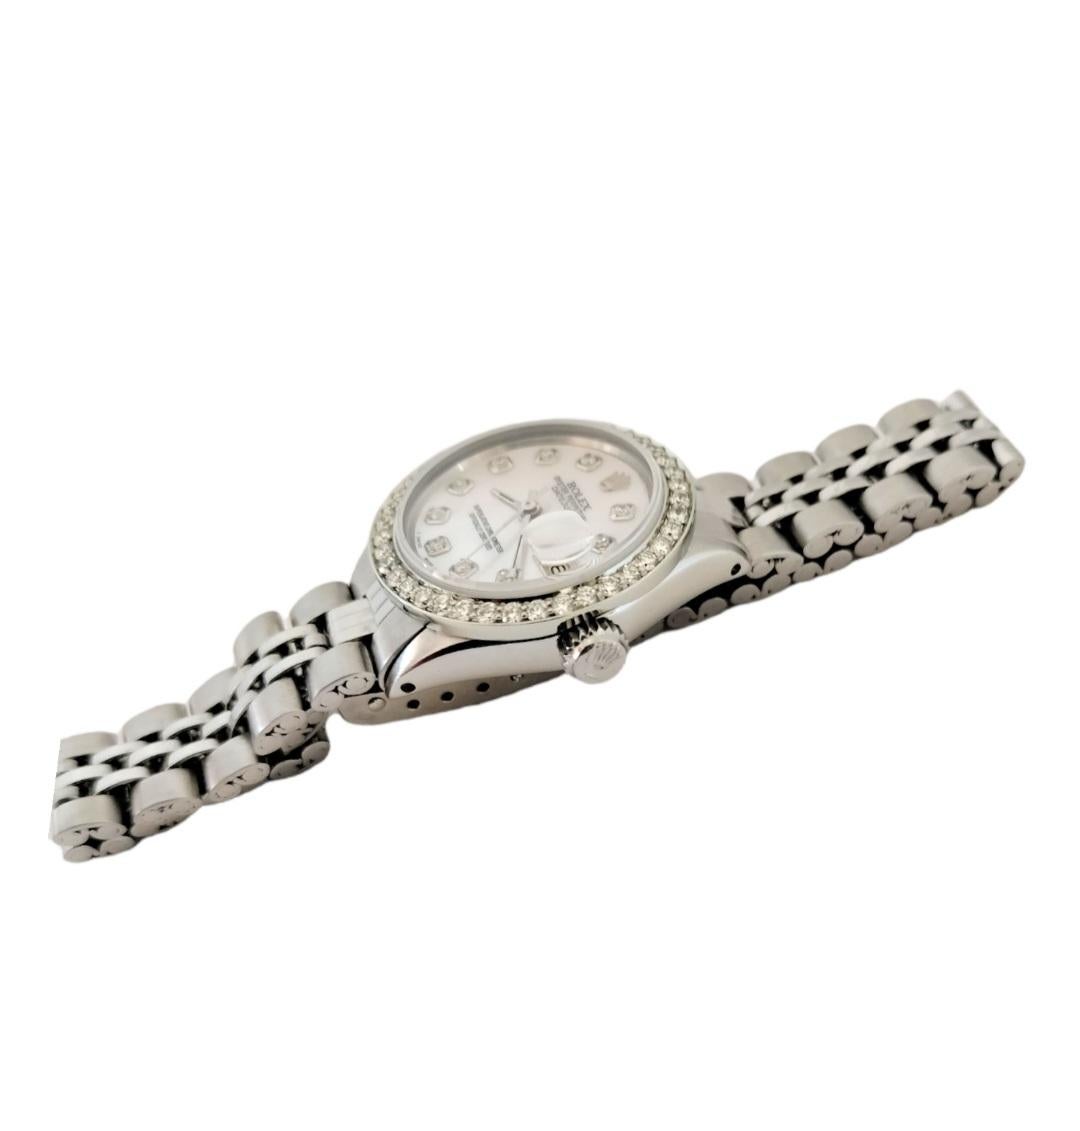 Brand - Rolex
Gender - Ladies
Model - 6517 Datejust 
Metals - Stainless steel 
Case size - 26mm
Bezel - Steel Diamond
Crystal - Sapphire
Movement - Automatic Rolex Cal.1161
Dial - Refinished White Mother of Pearl 
Wrist band - Steel Folded